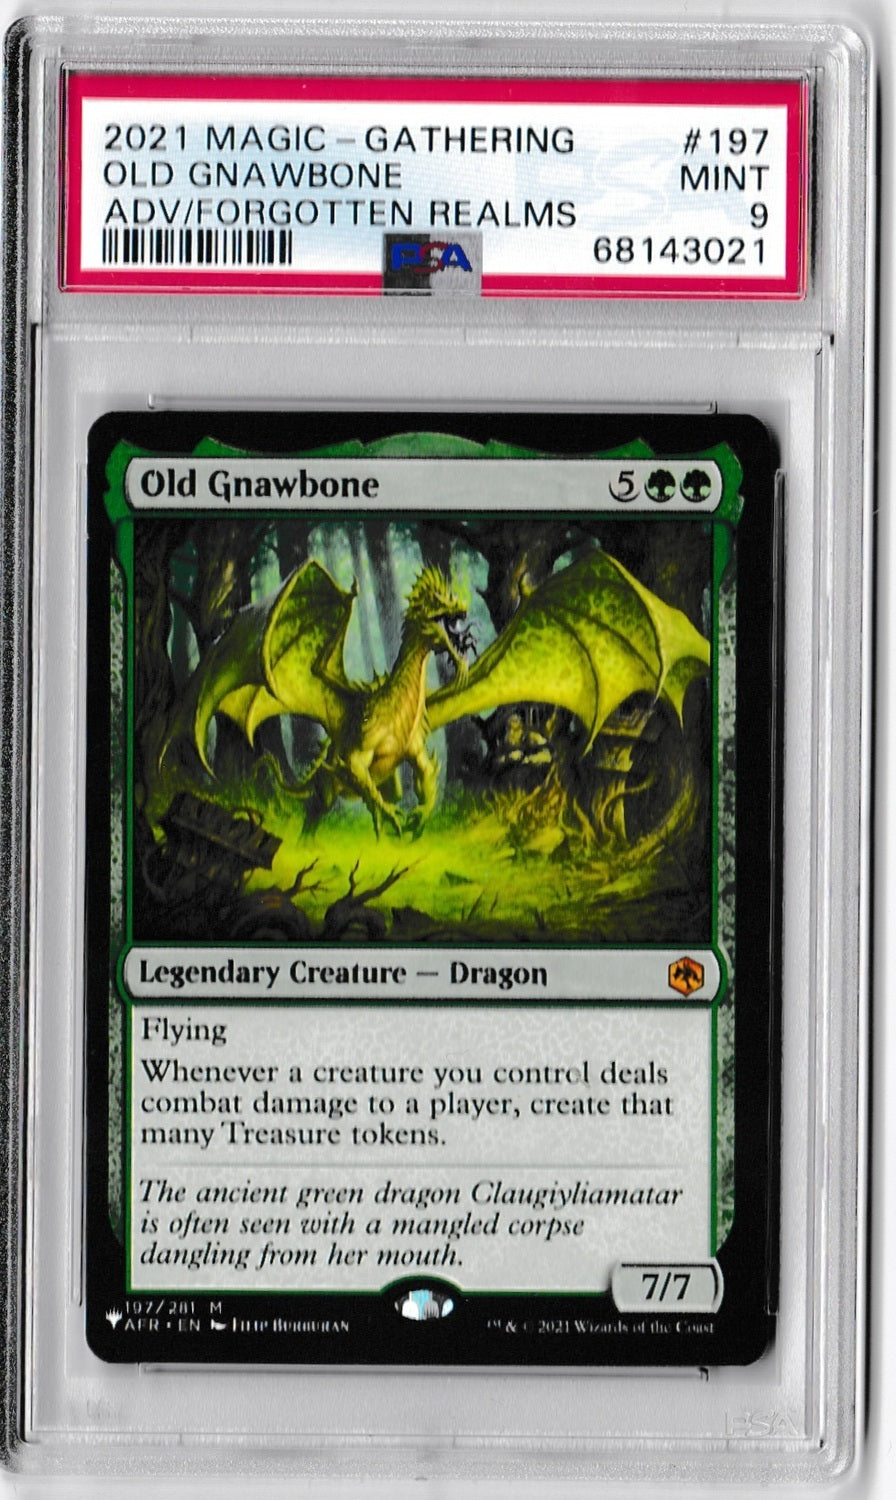 2021 MAGIC THE GATHERING ADVENTURES IN THE FORGOTTEN REALMS 197 OLD GNAWBONE PSA MINT 9